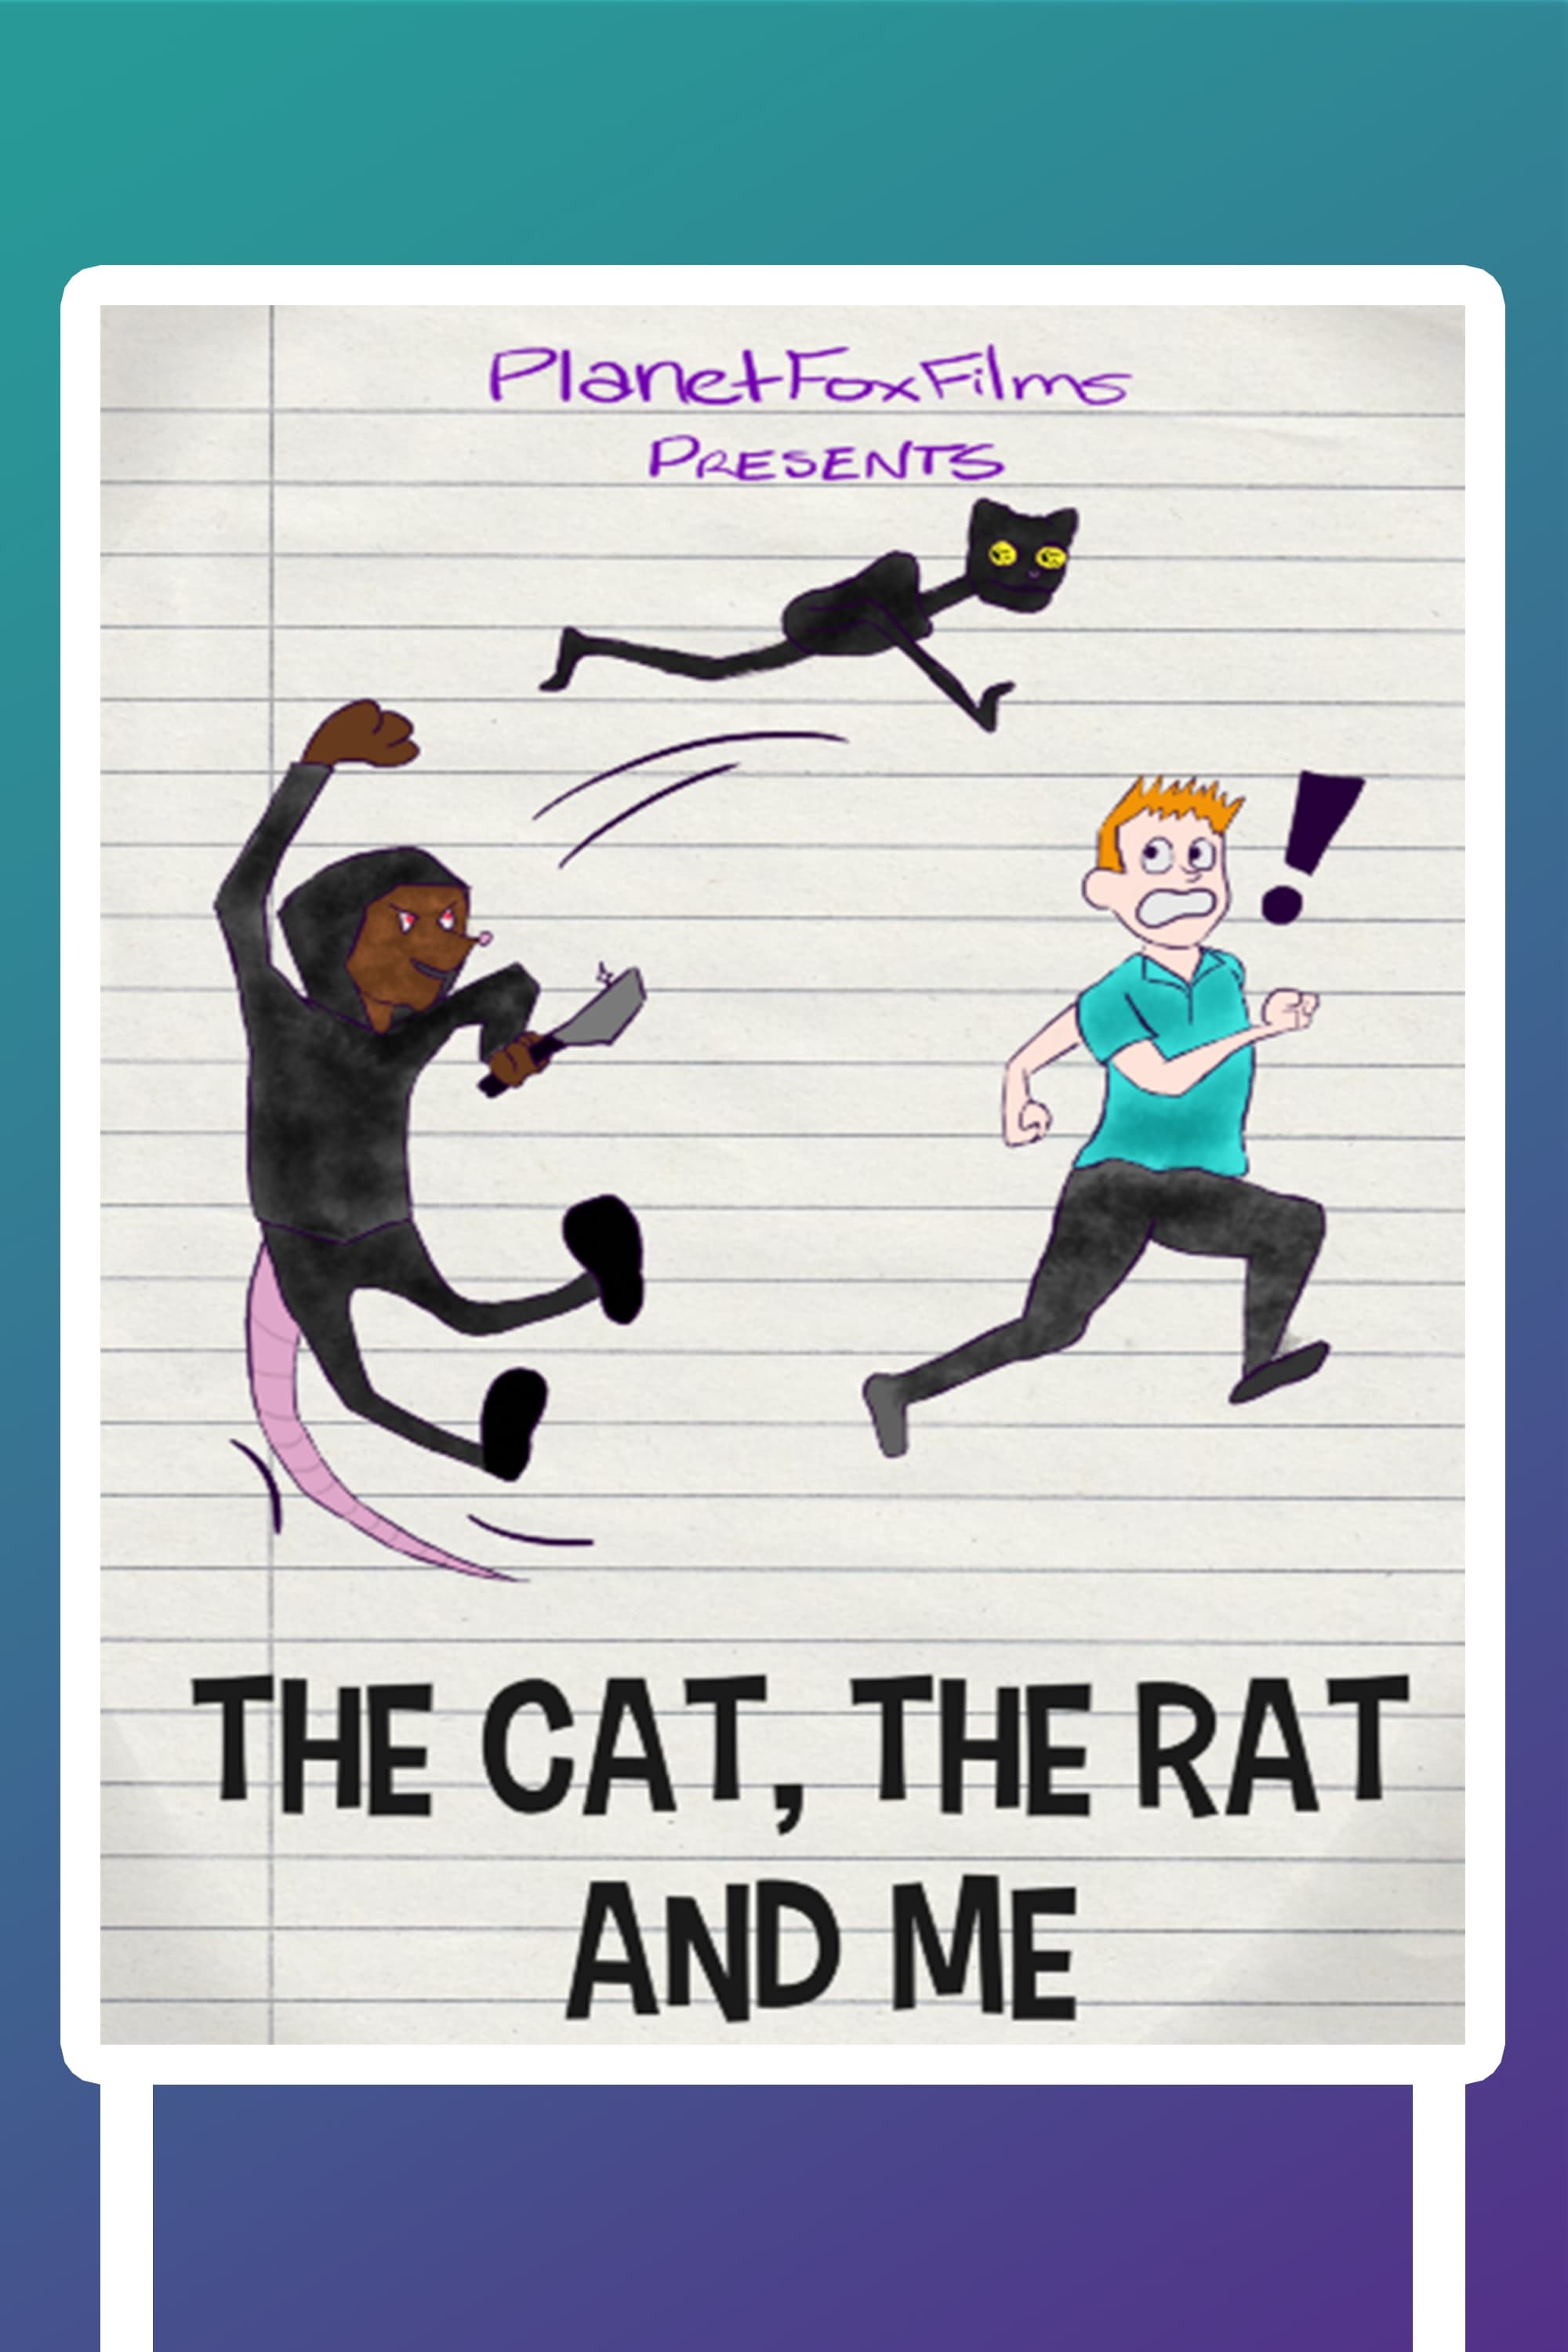 The Cat, the Rat, and Me